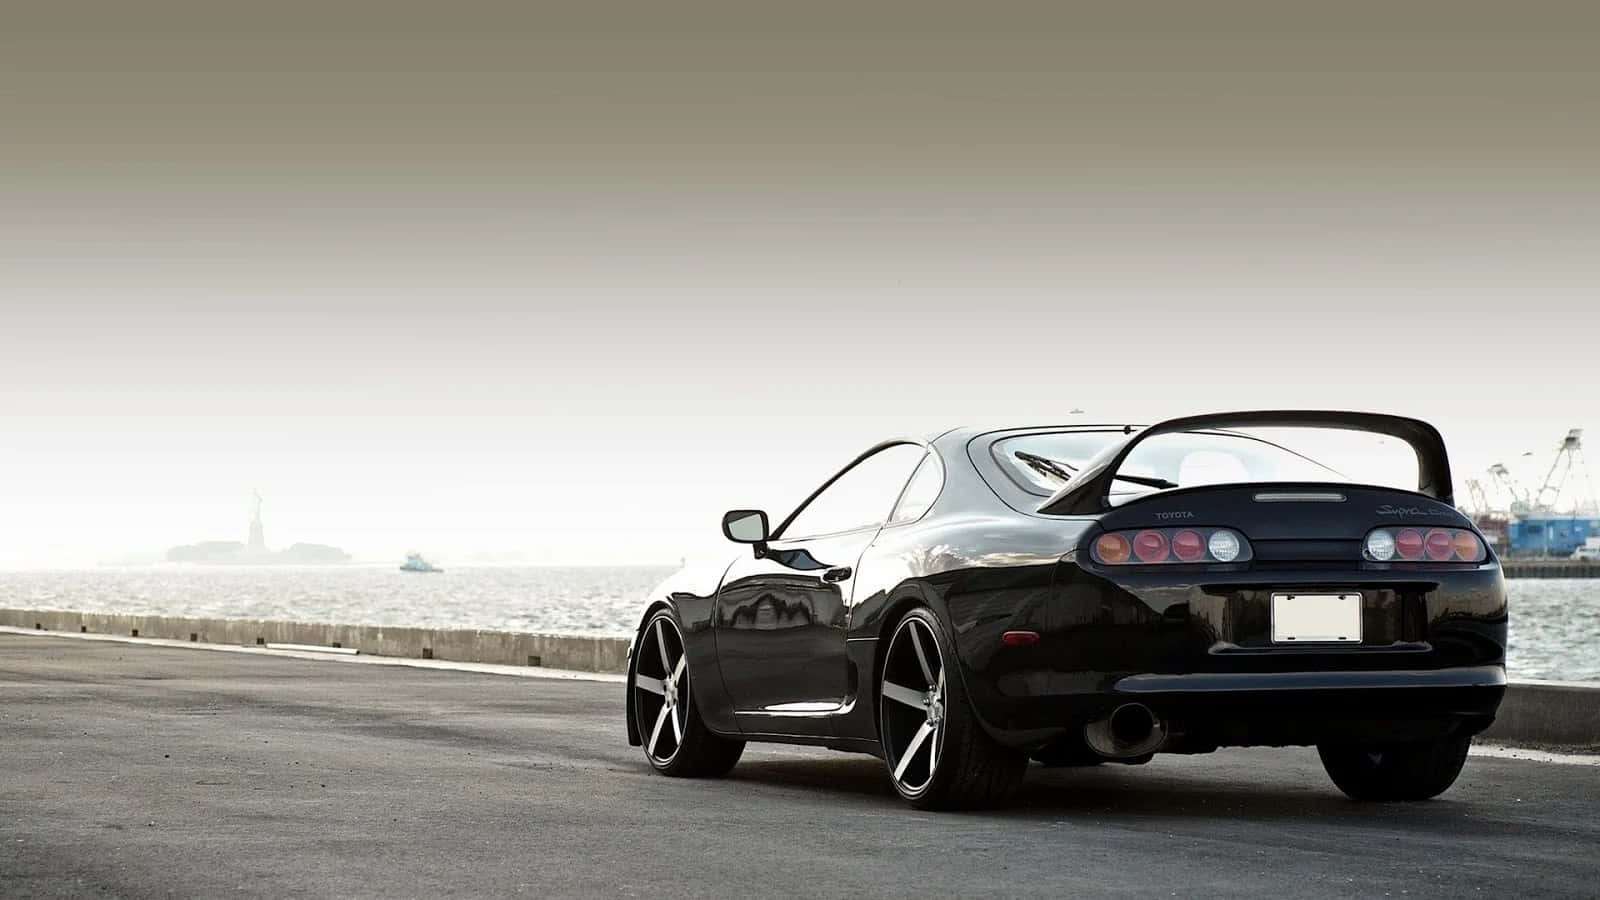 Supra Sports Car on the Road